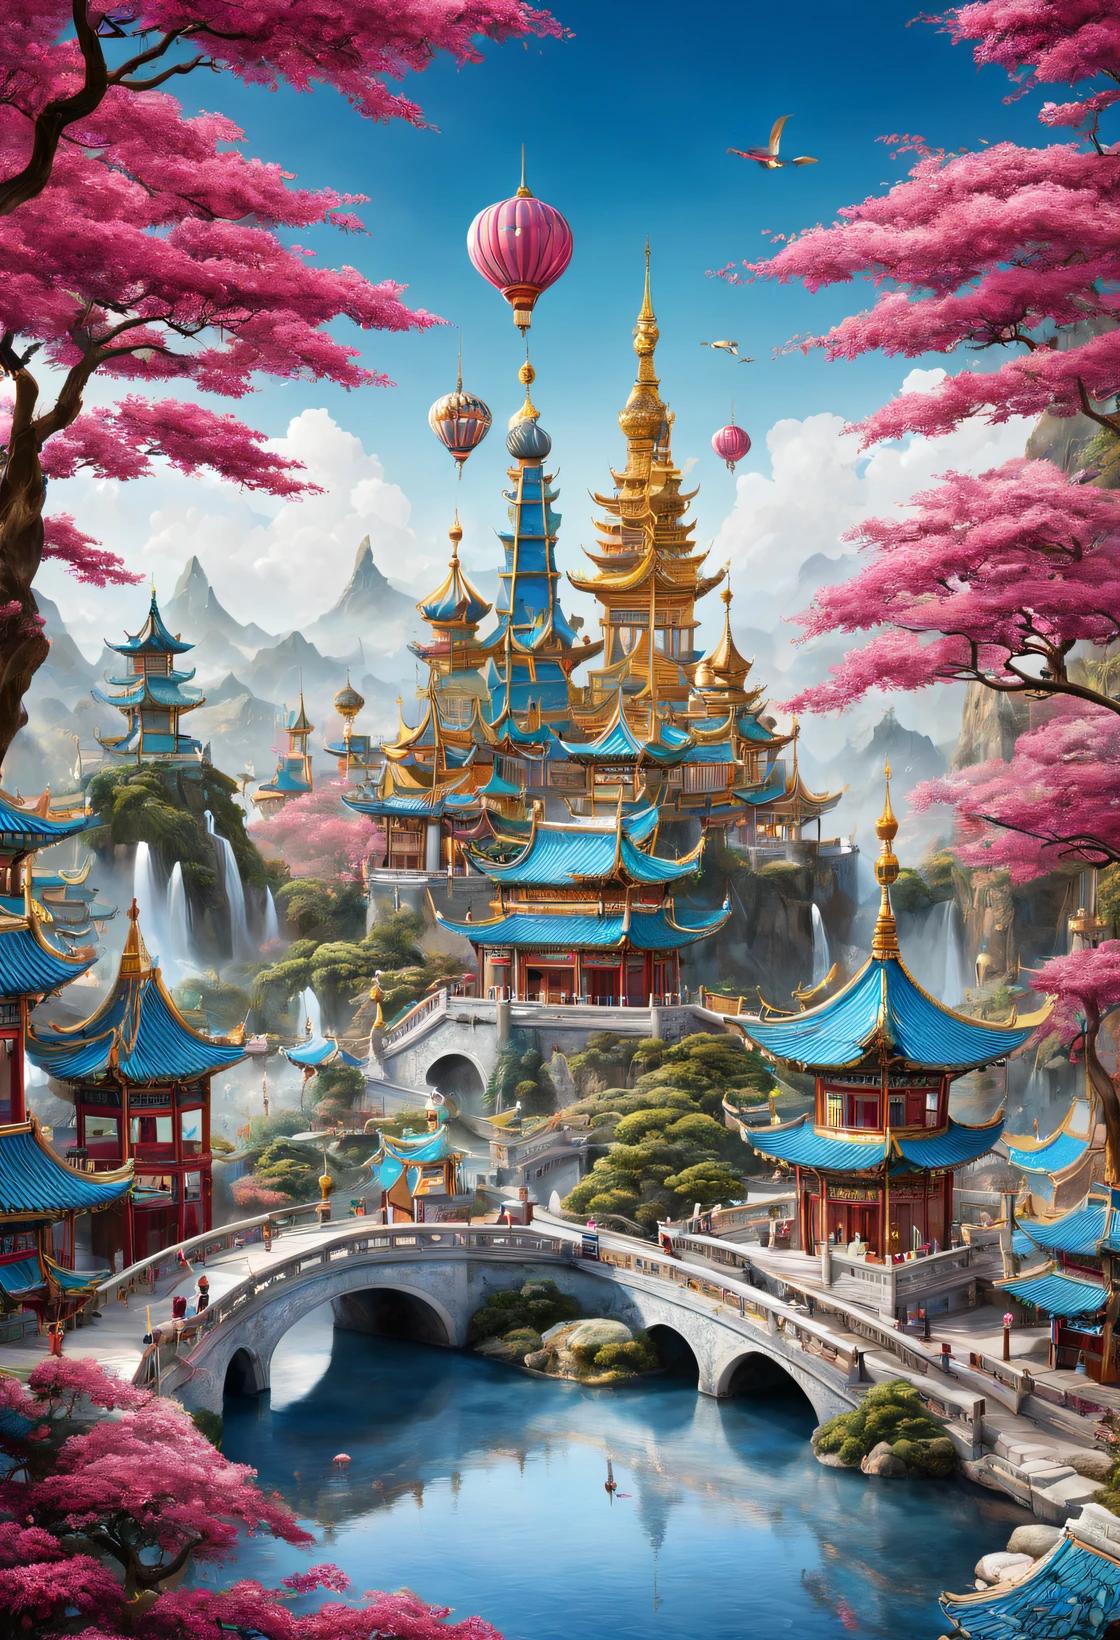 （Very unified CG design），（Poster design）， (cloisonne theme park poster），（）Poster with text China Cloisonné Theme Park），dreamland dreamland，ultra-realistic realism，Asymmetrical balance ，( magenta ）Carmine＋( blue white colors ）Blue-cyan＋( tin foil gold ）golden colored，